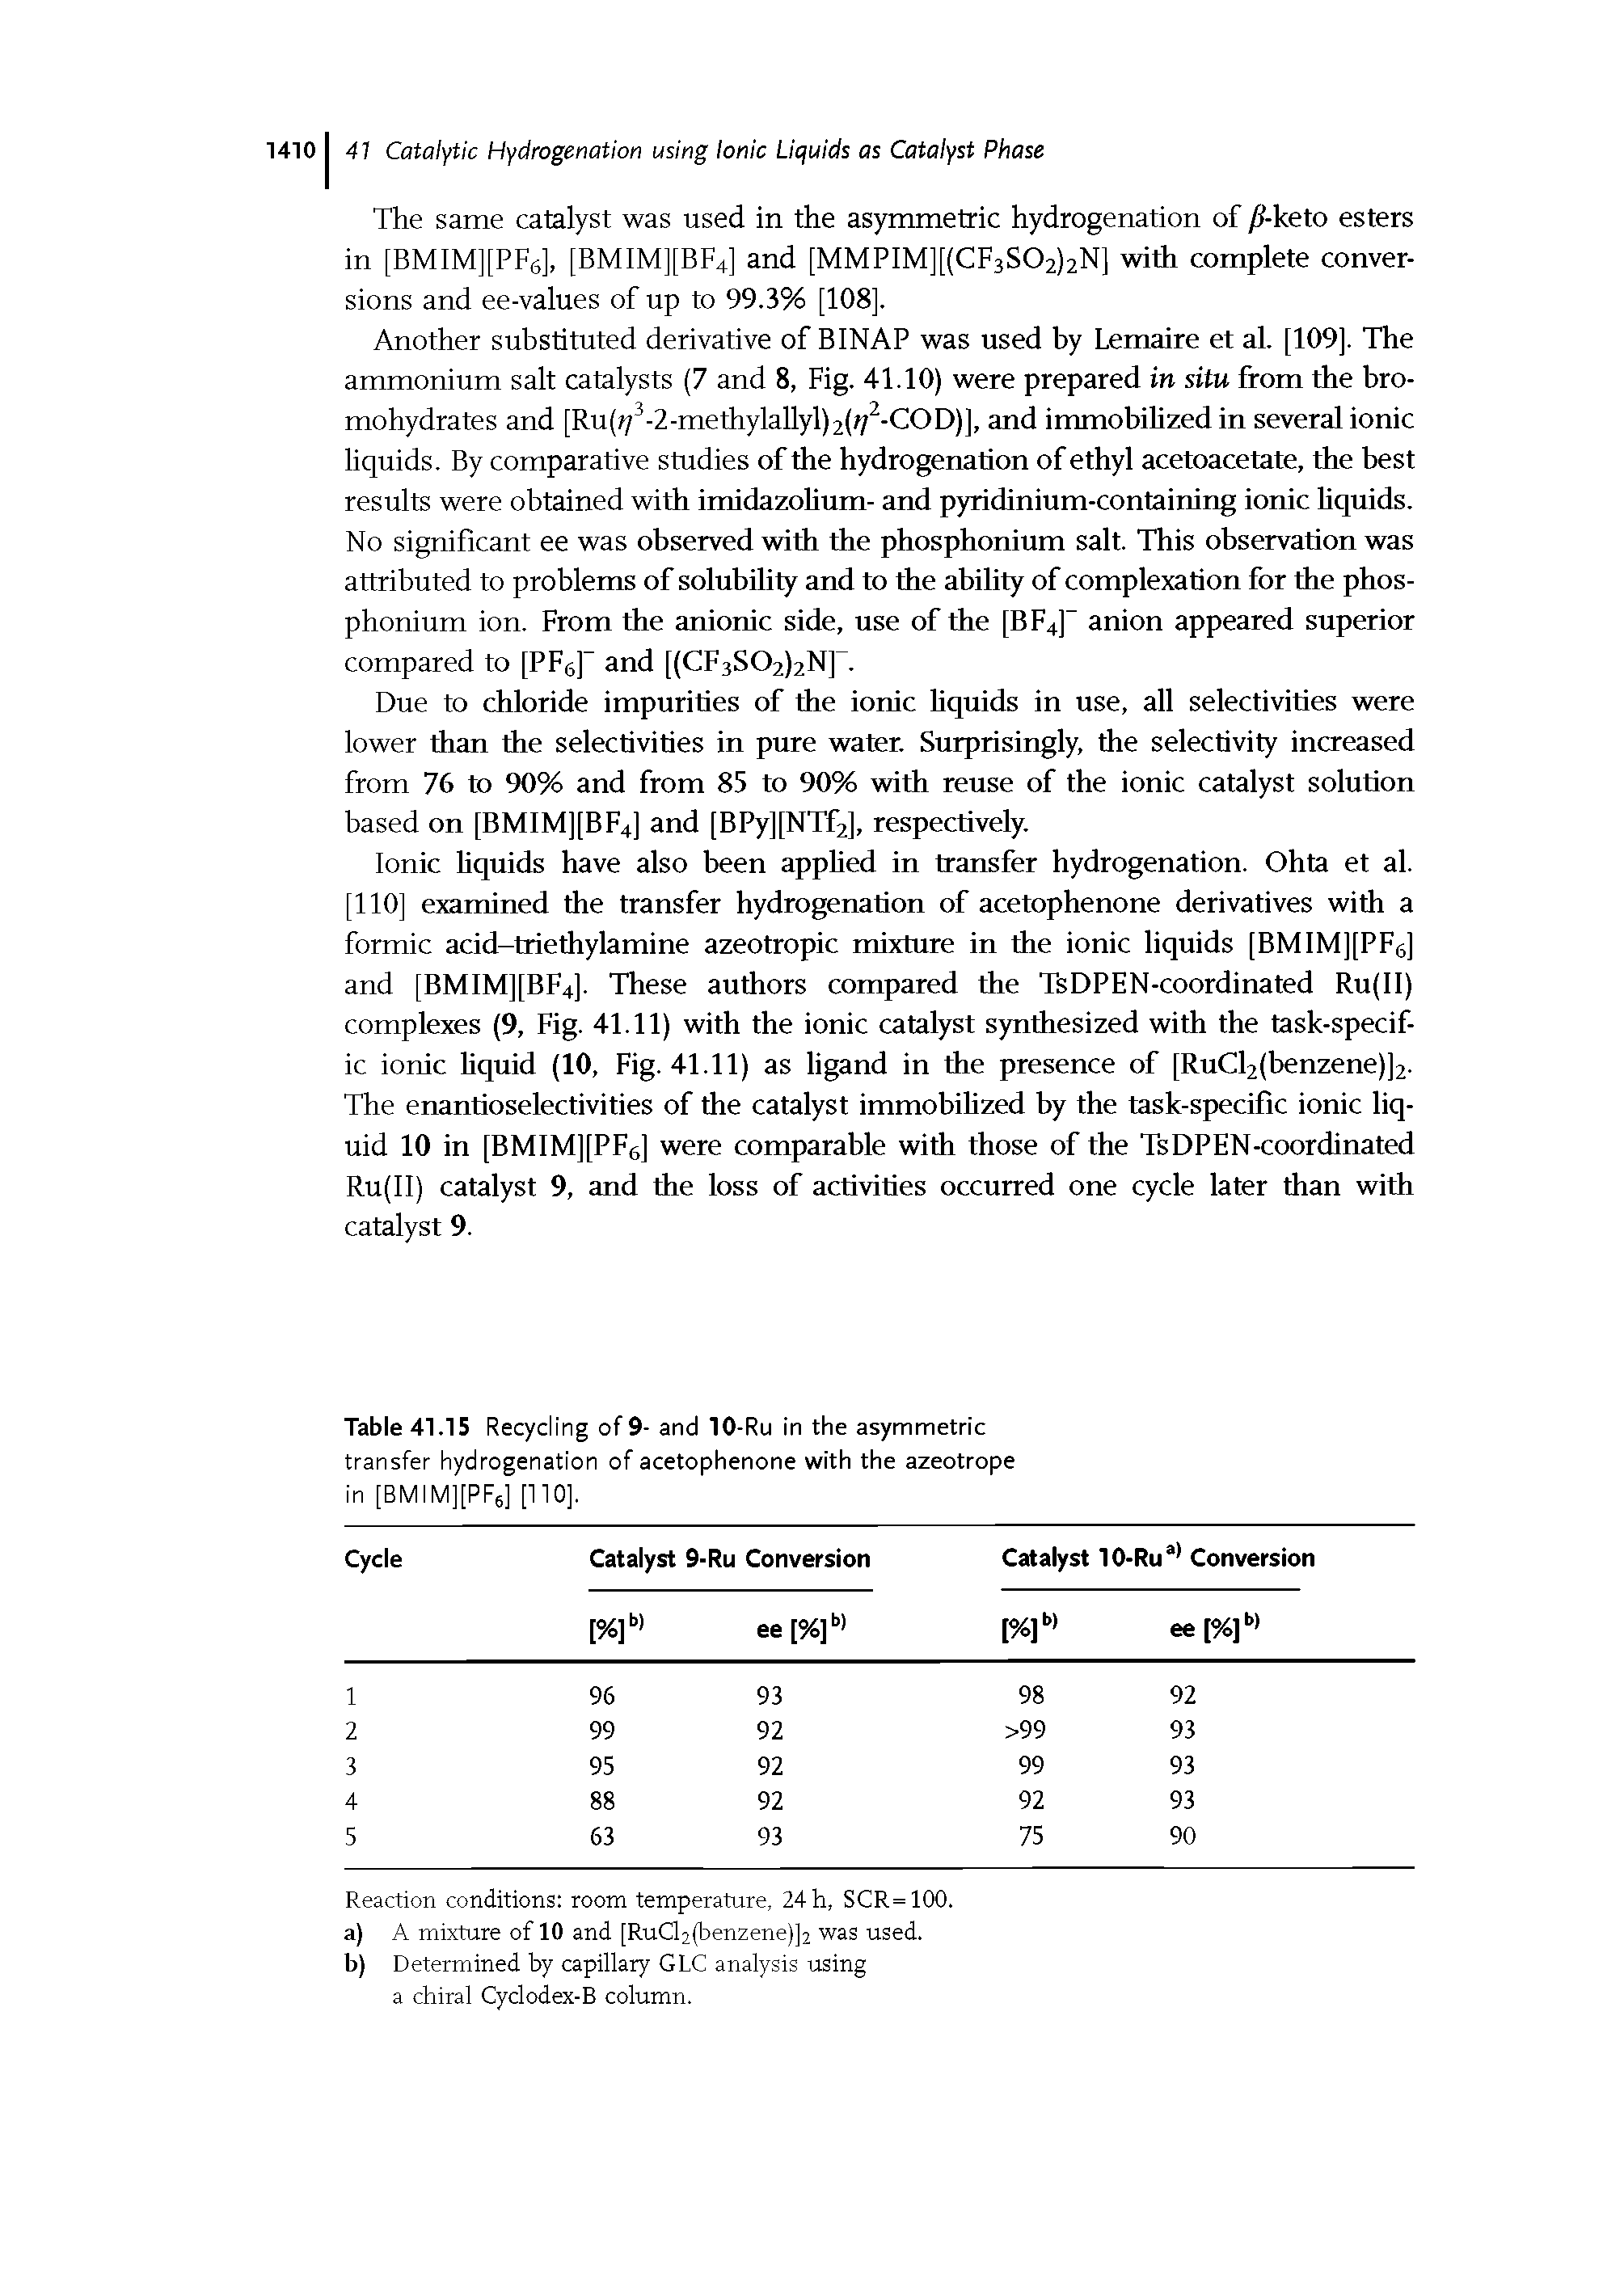 Table 41.15 Recycling of 9- and 10-Ru in the asymmetric transfer hydrogenation of acetophenone with the azeotrope in [BMIM][PF6] [110].